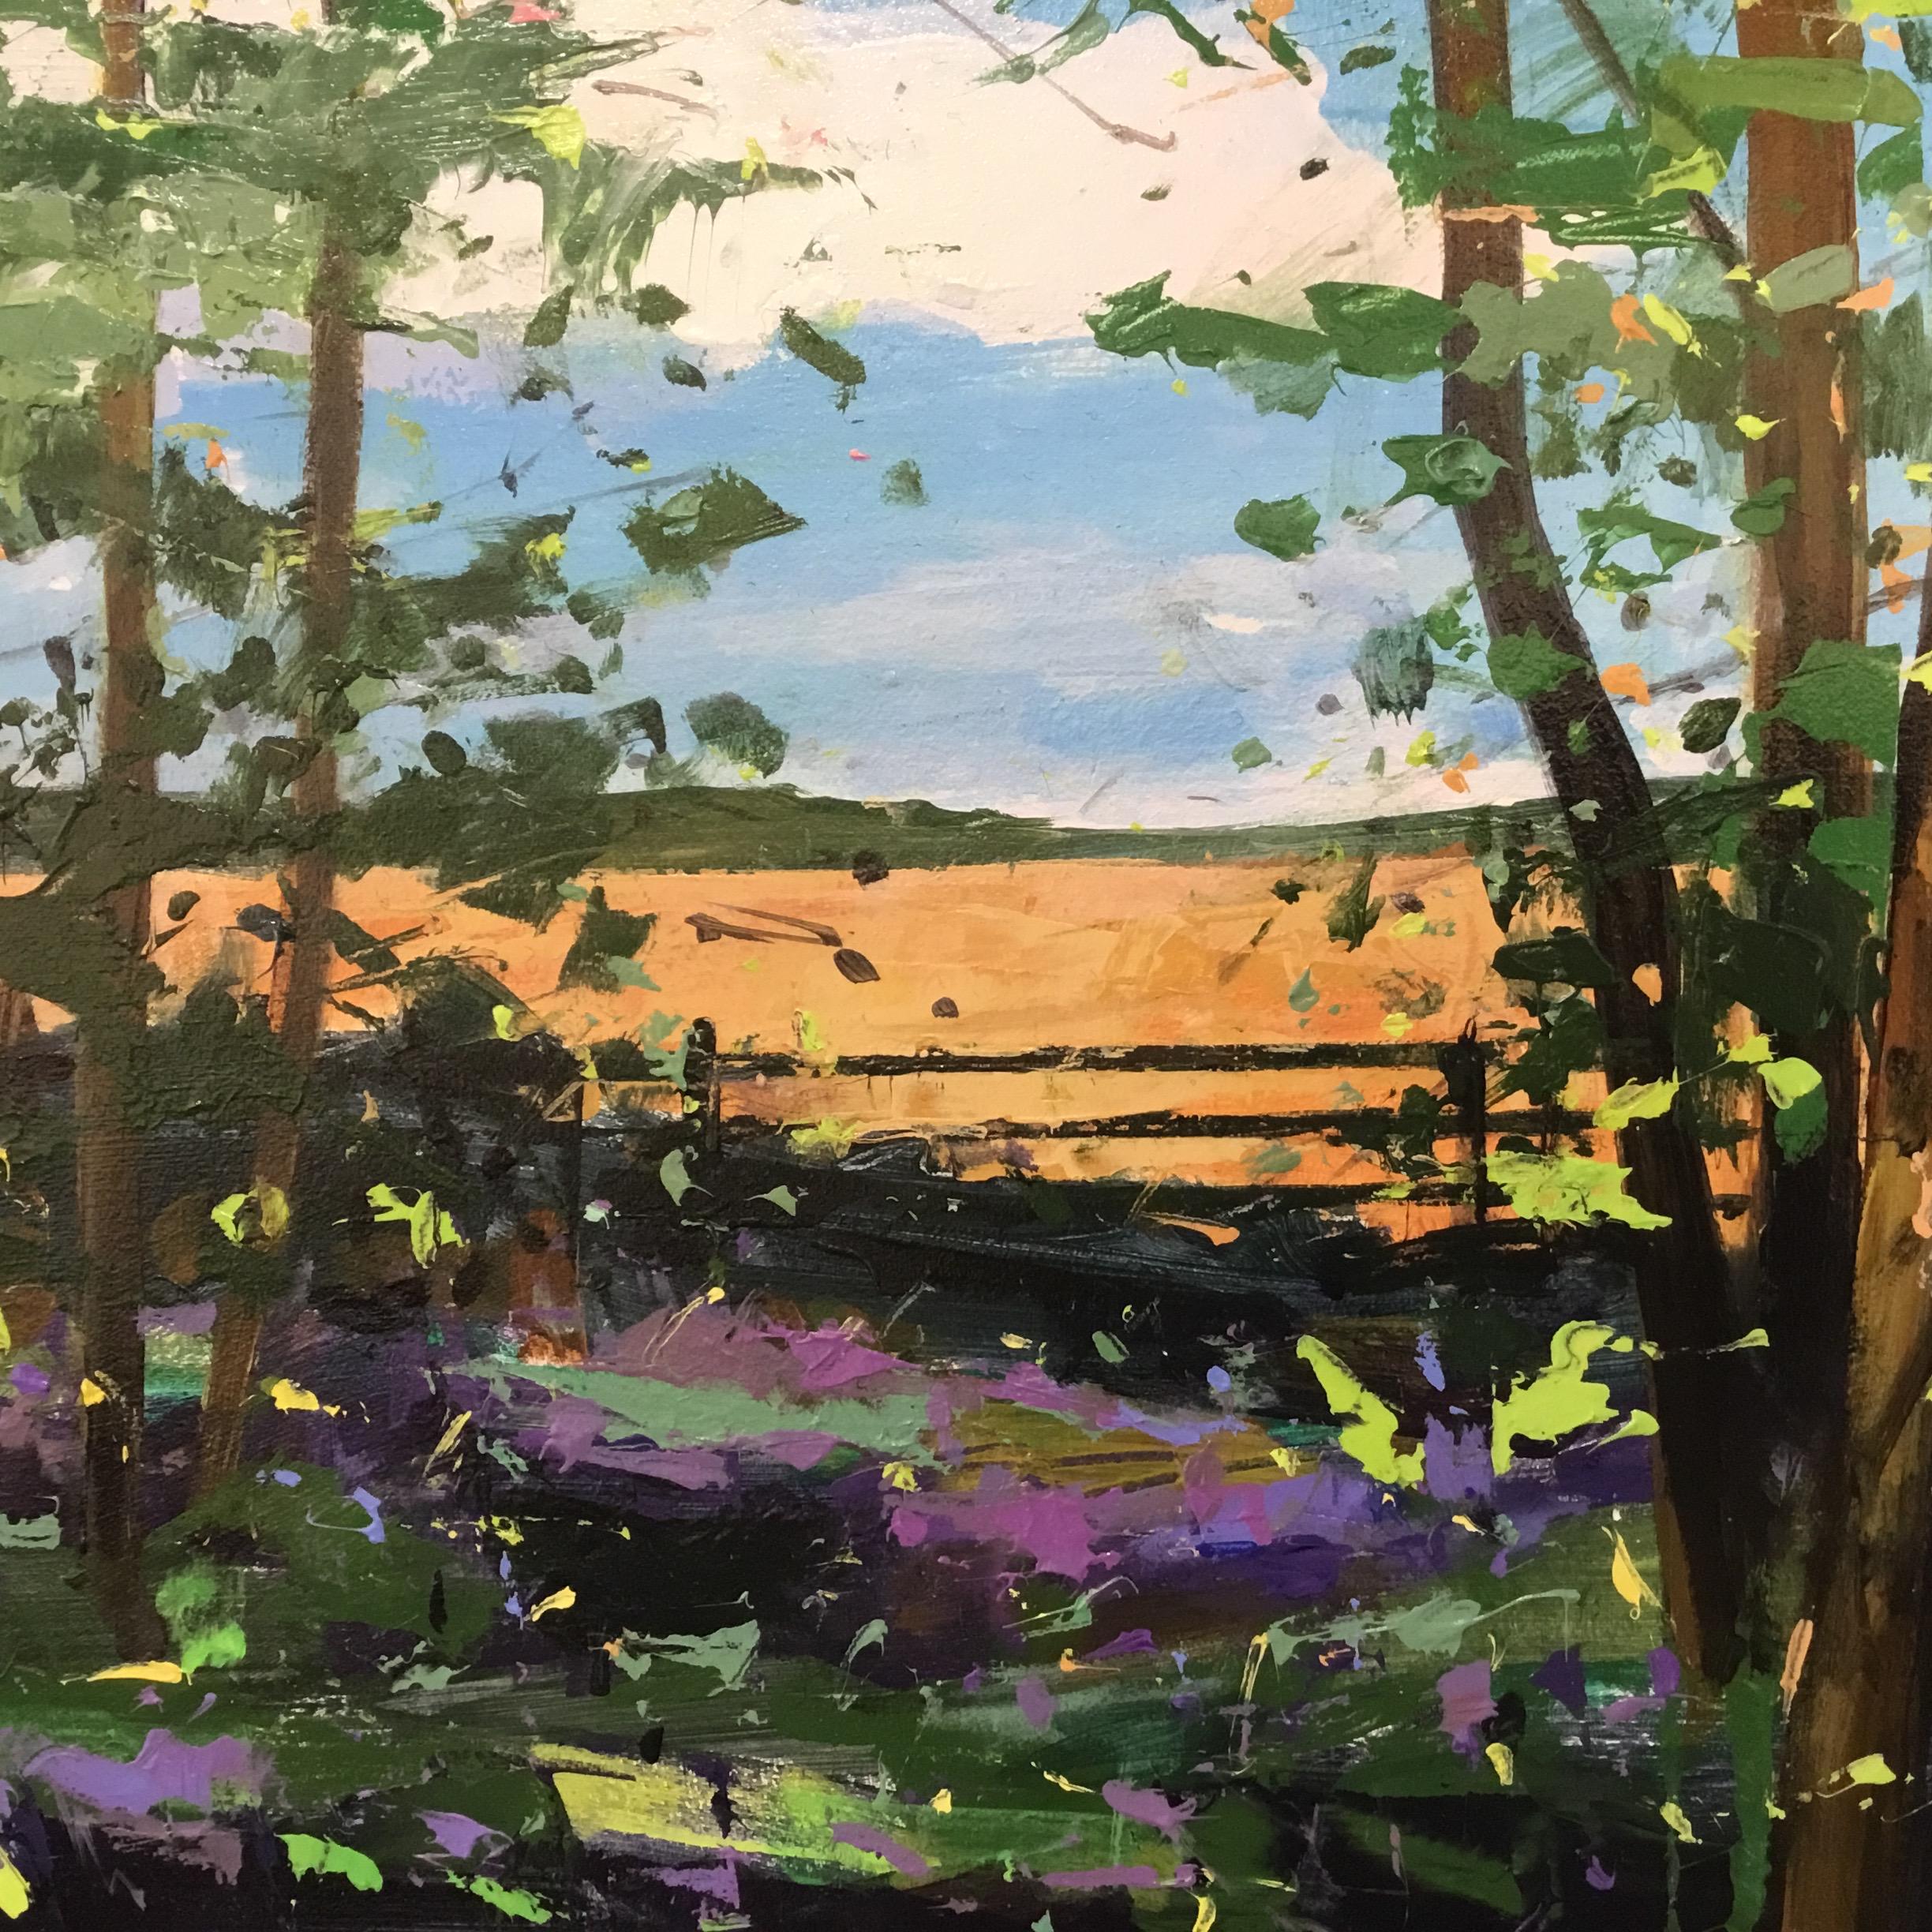 ‘Great Is Your Love’ is an original landscape painting of bluebells. It is a contemporary and impressionistic work of a view from a path through a border of bluebells to a field beyond a fence. My work celebrates the beauty and hum of nature. They